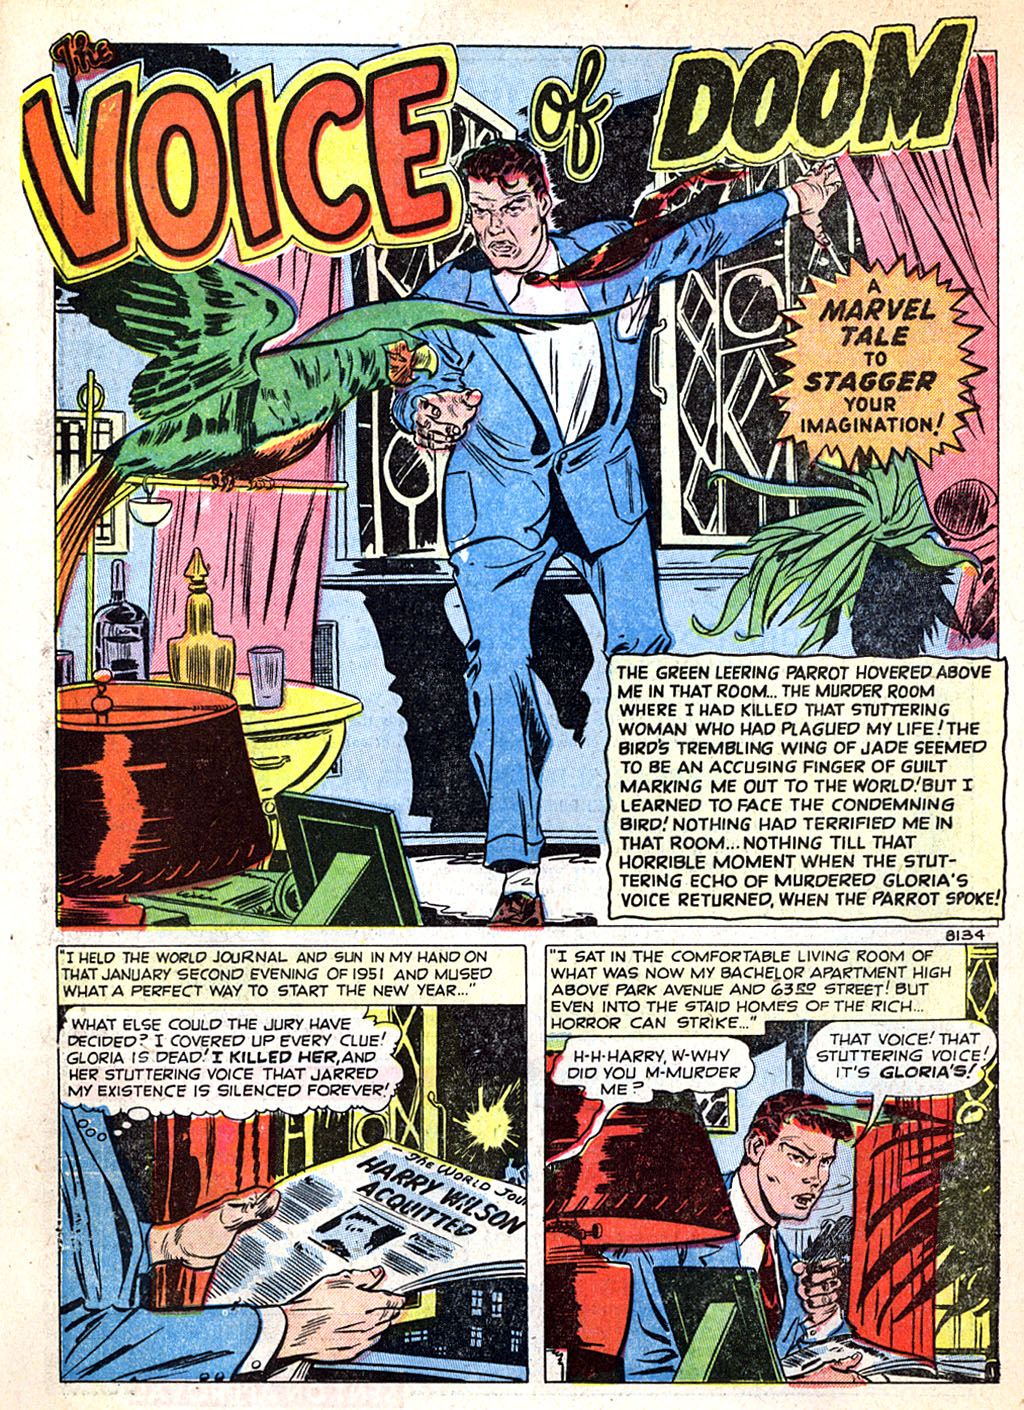 Marvel Tales (1949) 101 Page 21